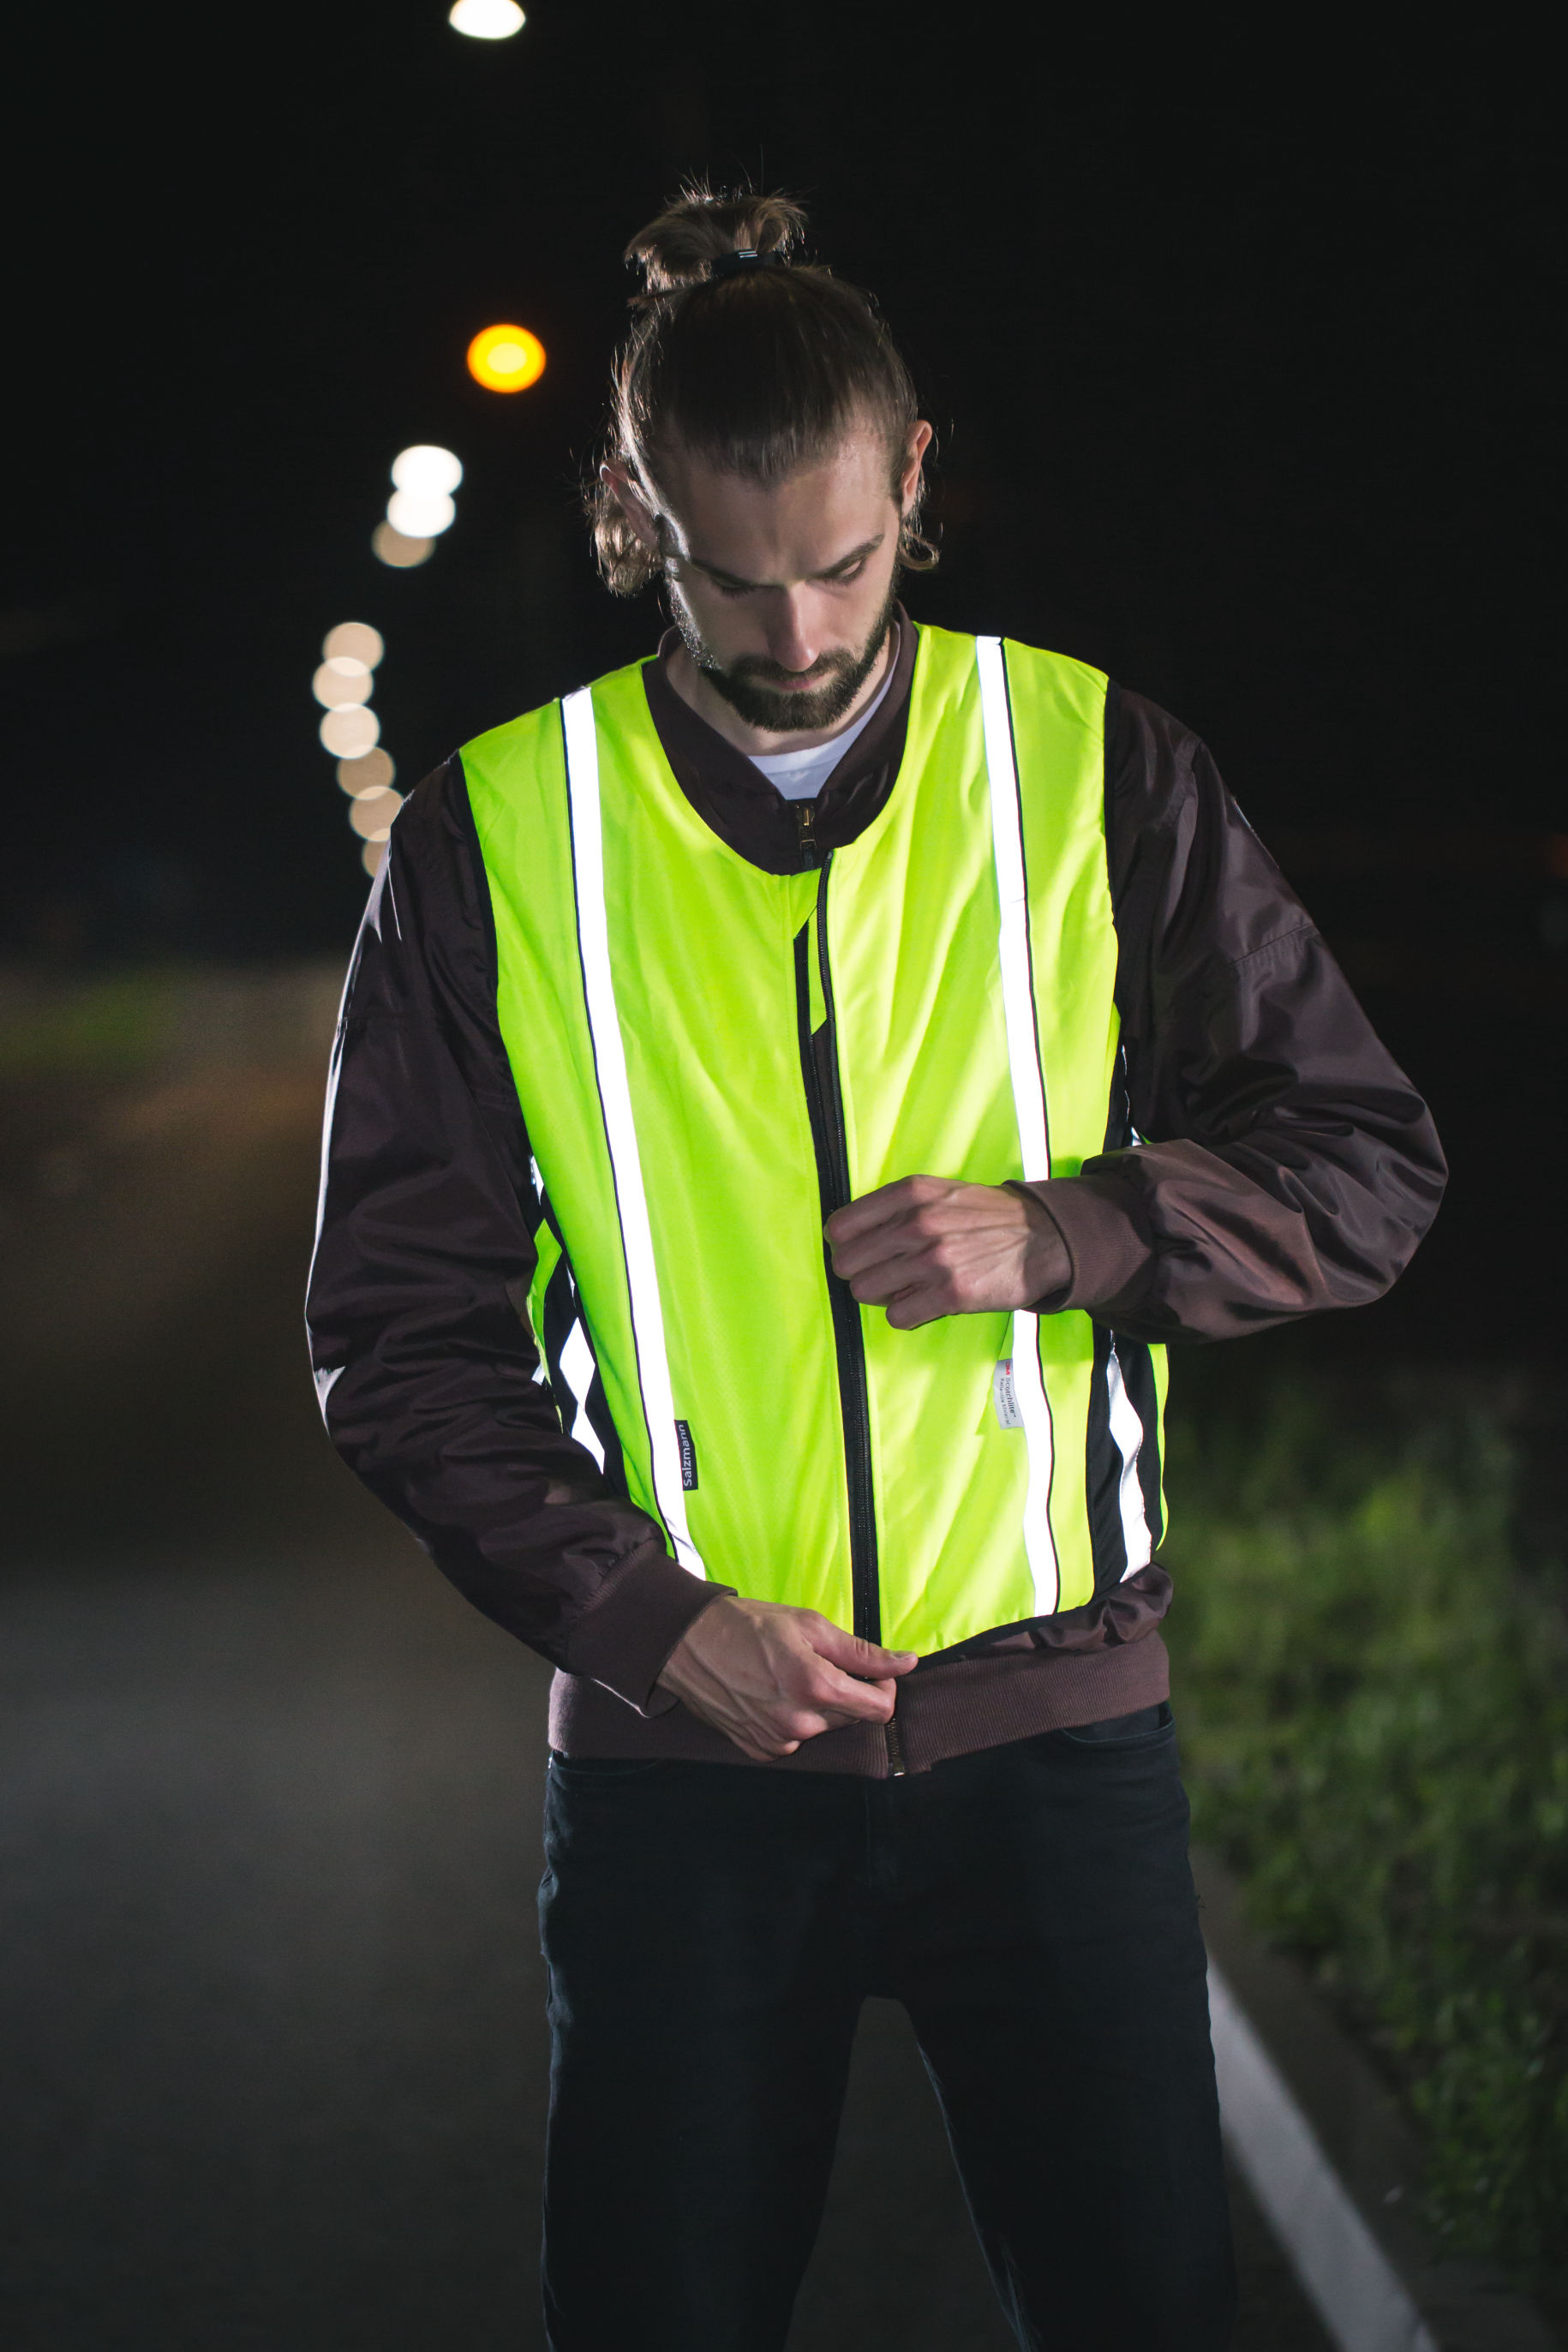 Be safe with reflective vest